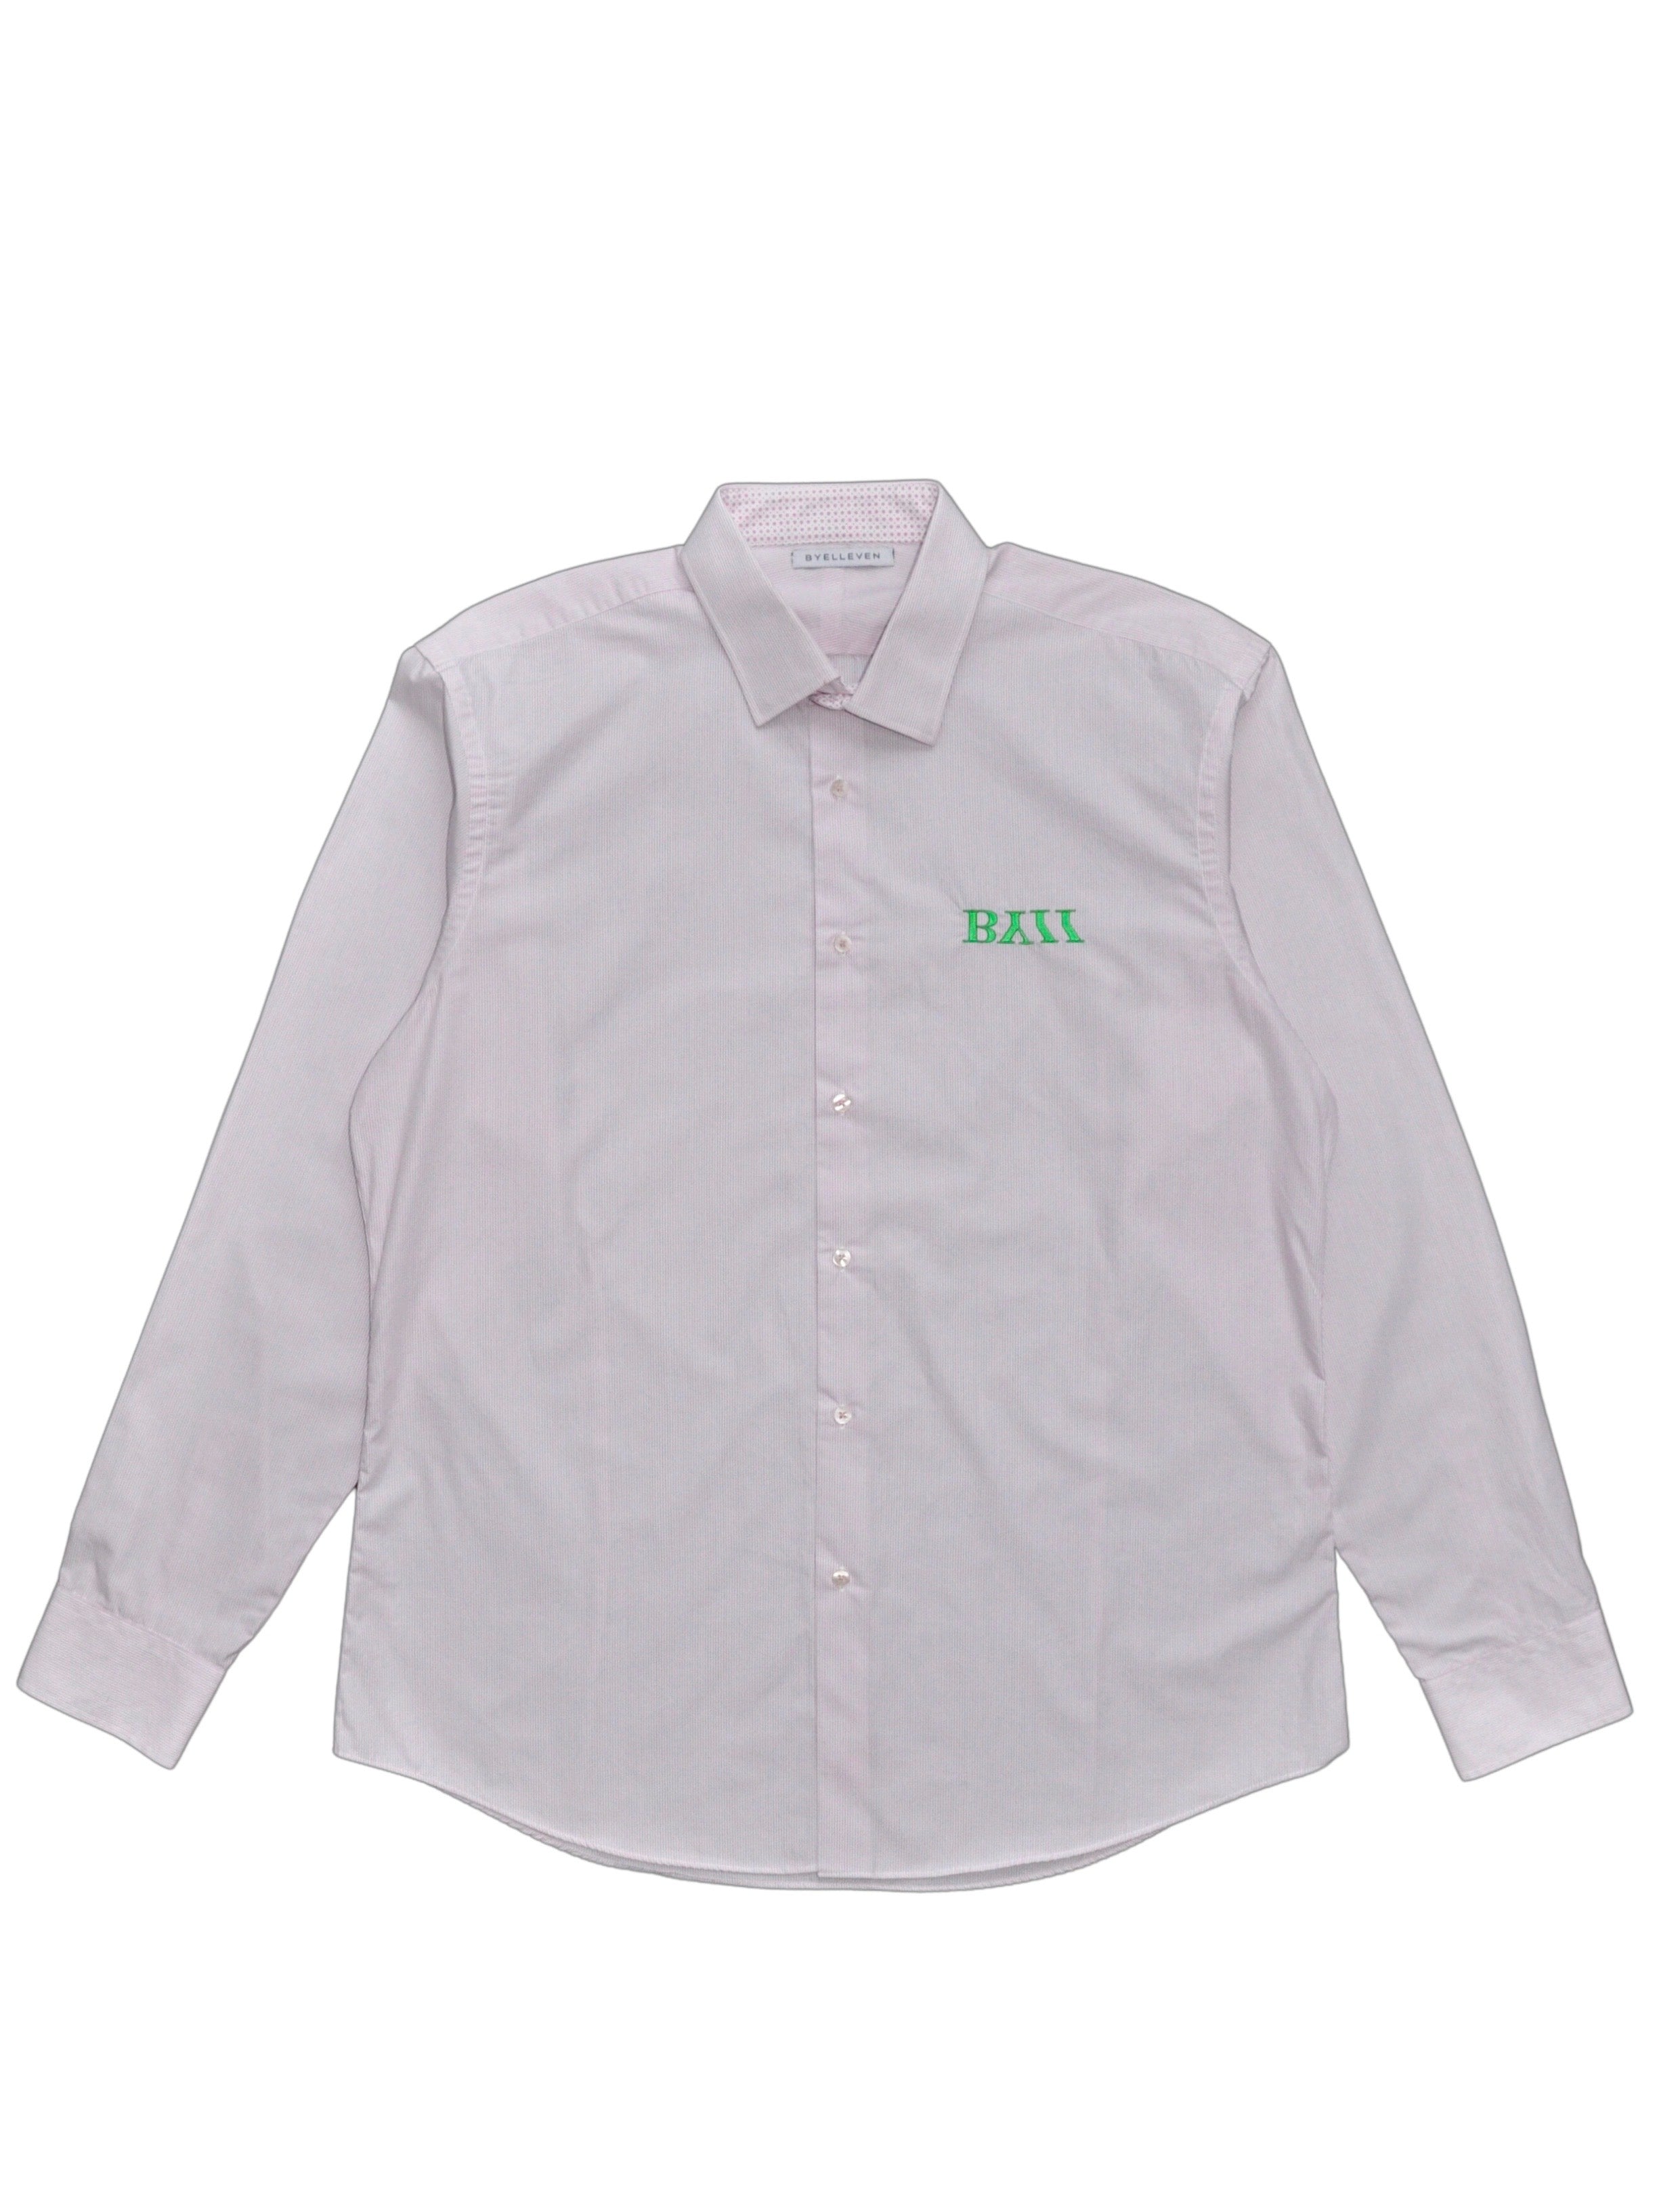 Reimagined Embroidered Logo Cotton Shirt - Pink Pinstripe